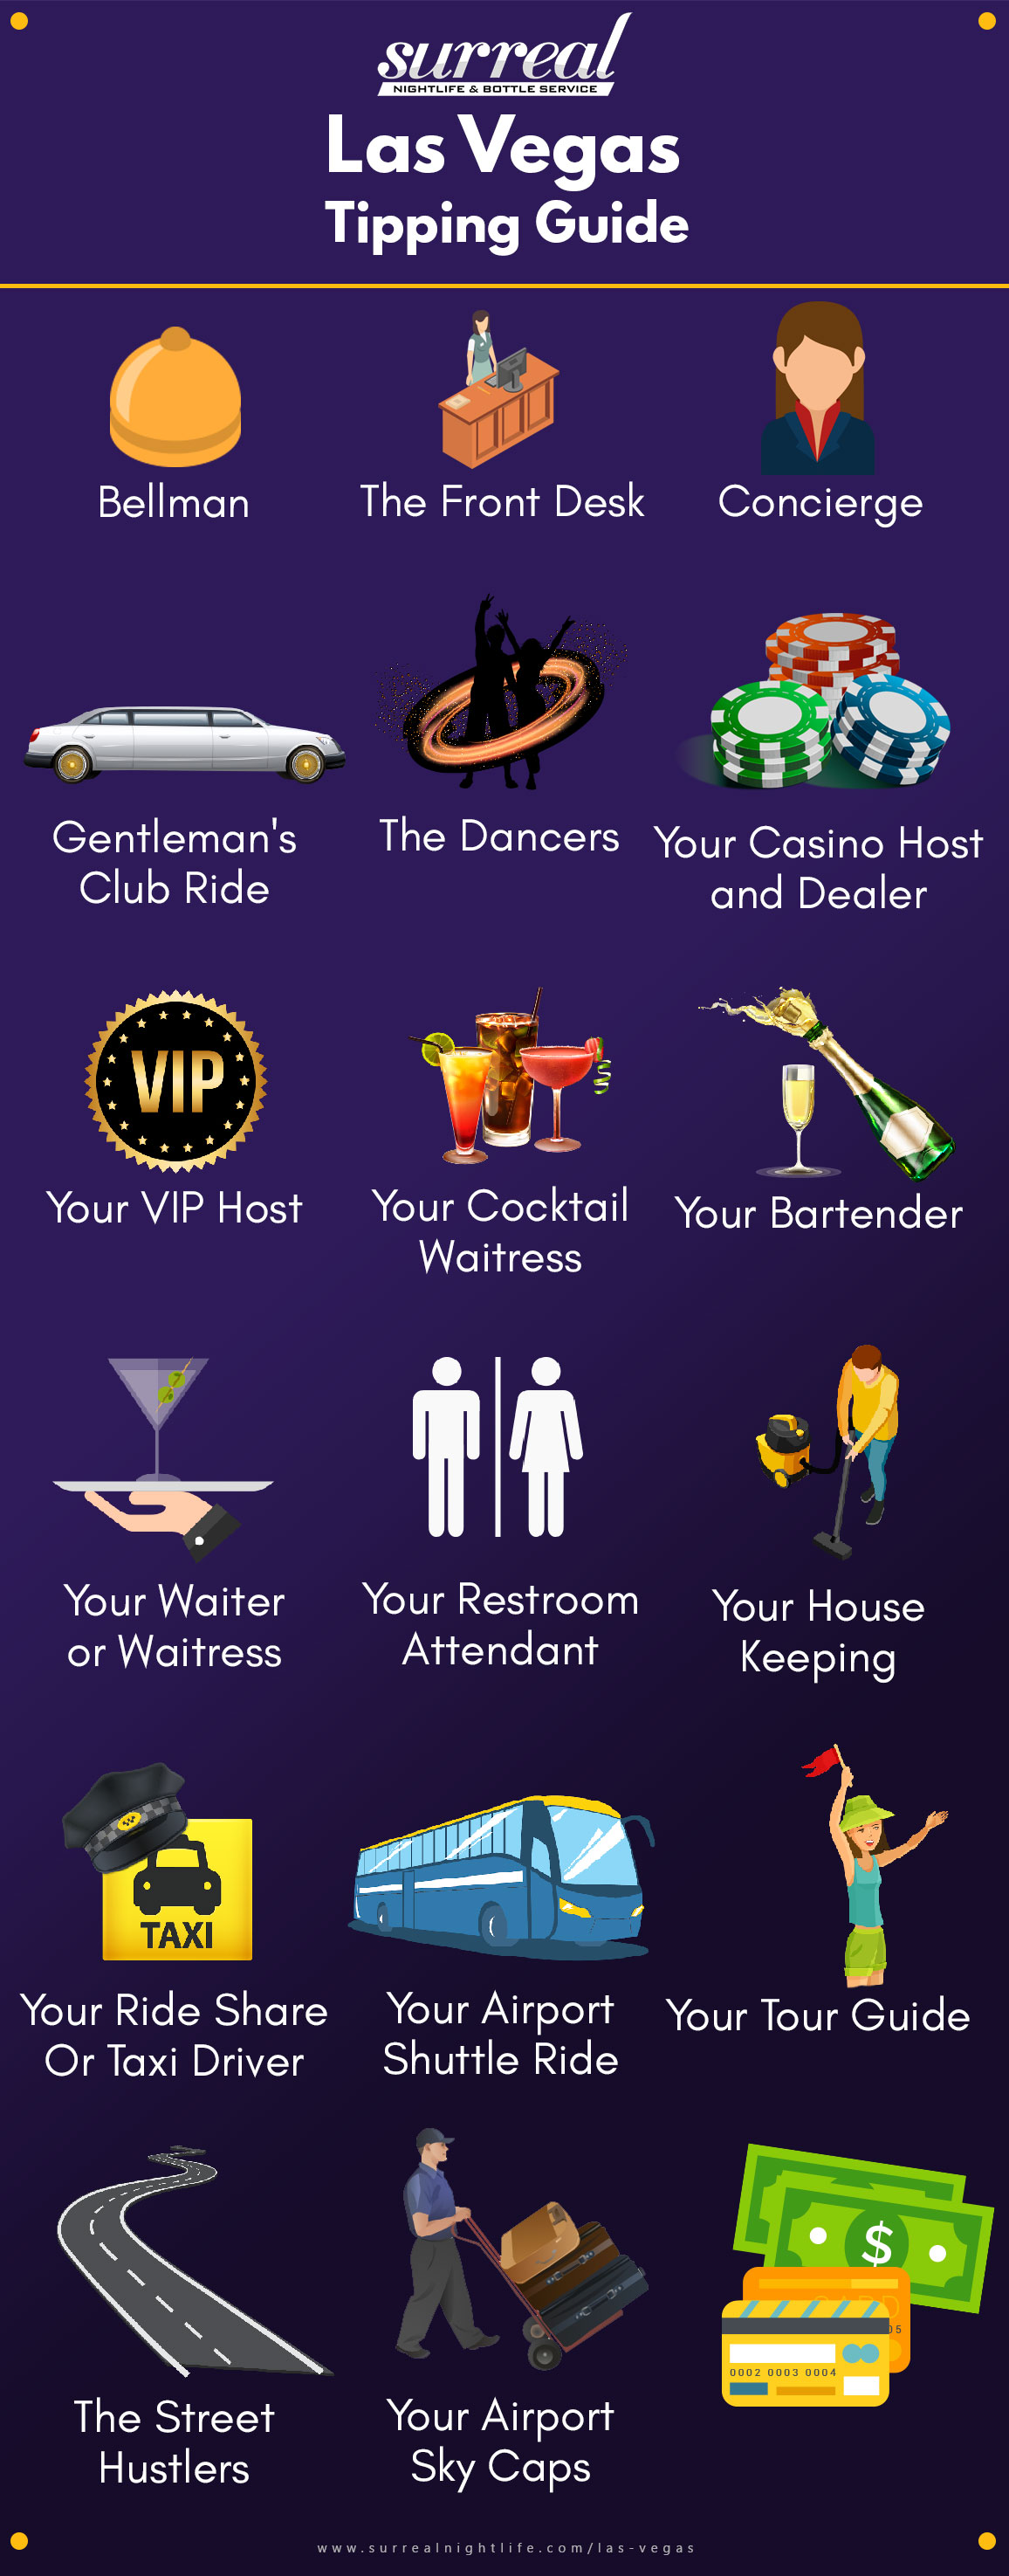 vegas tipping guide info 1